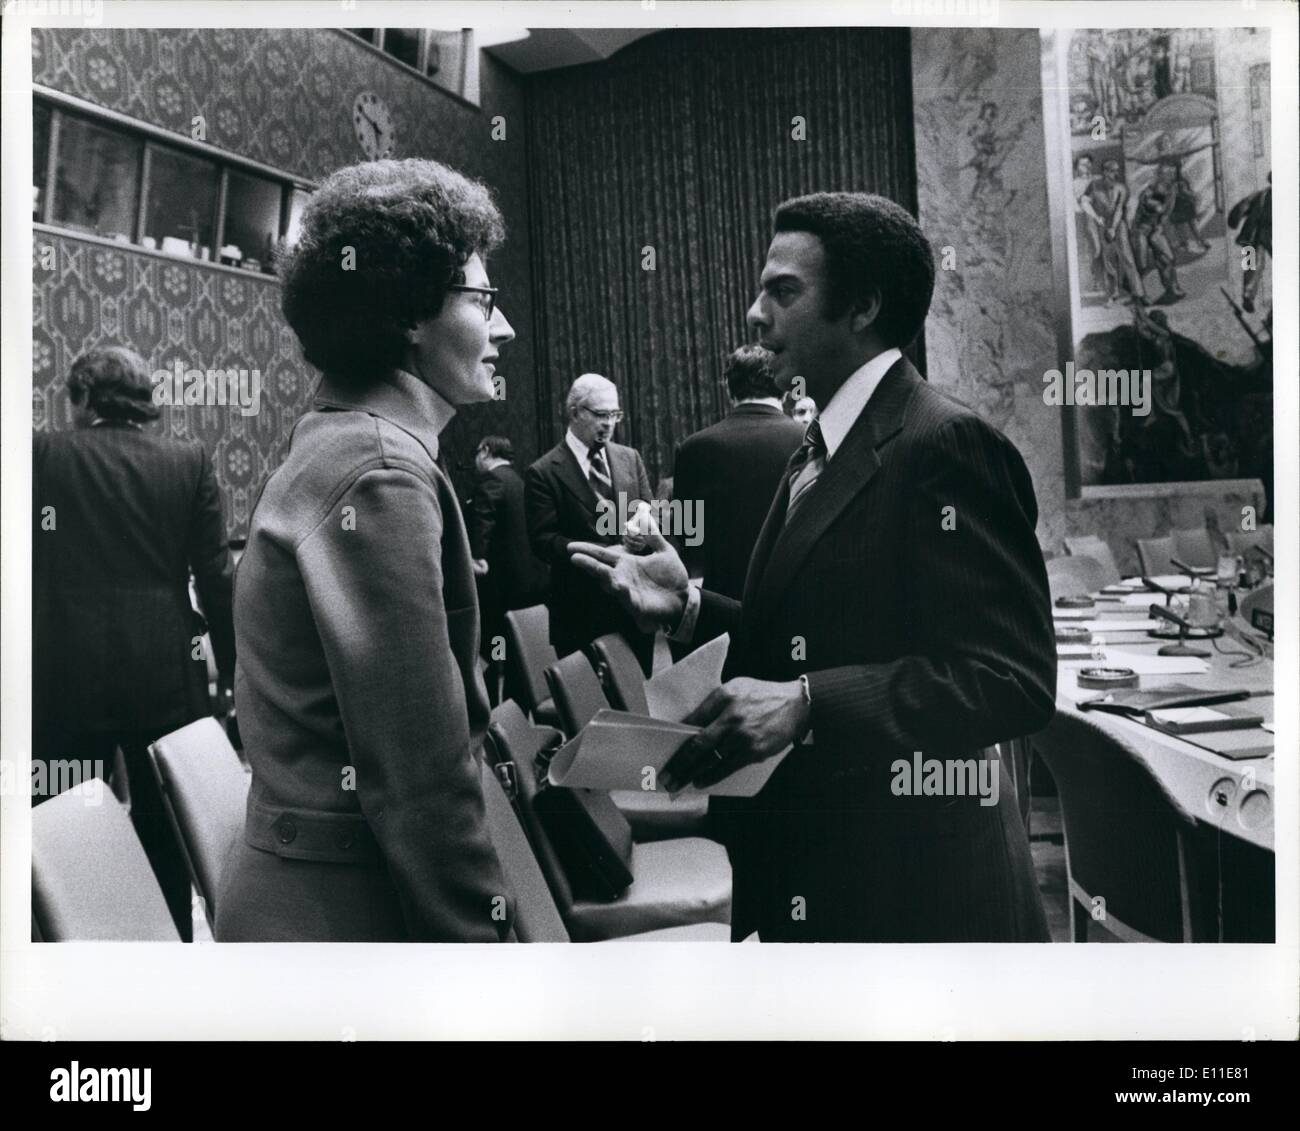 Sep. 09, 1977 - Sister Janice McLaughlin & Andrew Young UN Security Council meeting - UK & US Preposition - UN to ruled representative to Rhodesia. Sister Janice McLaughlin was meeting expelled from Rhodesia. Stock Photo